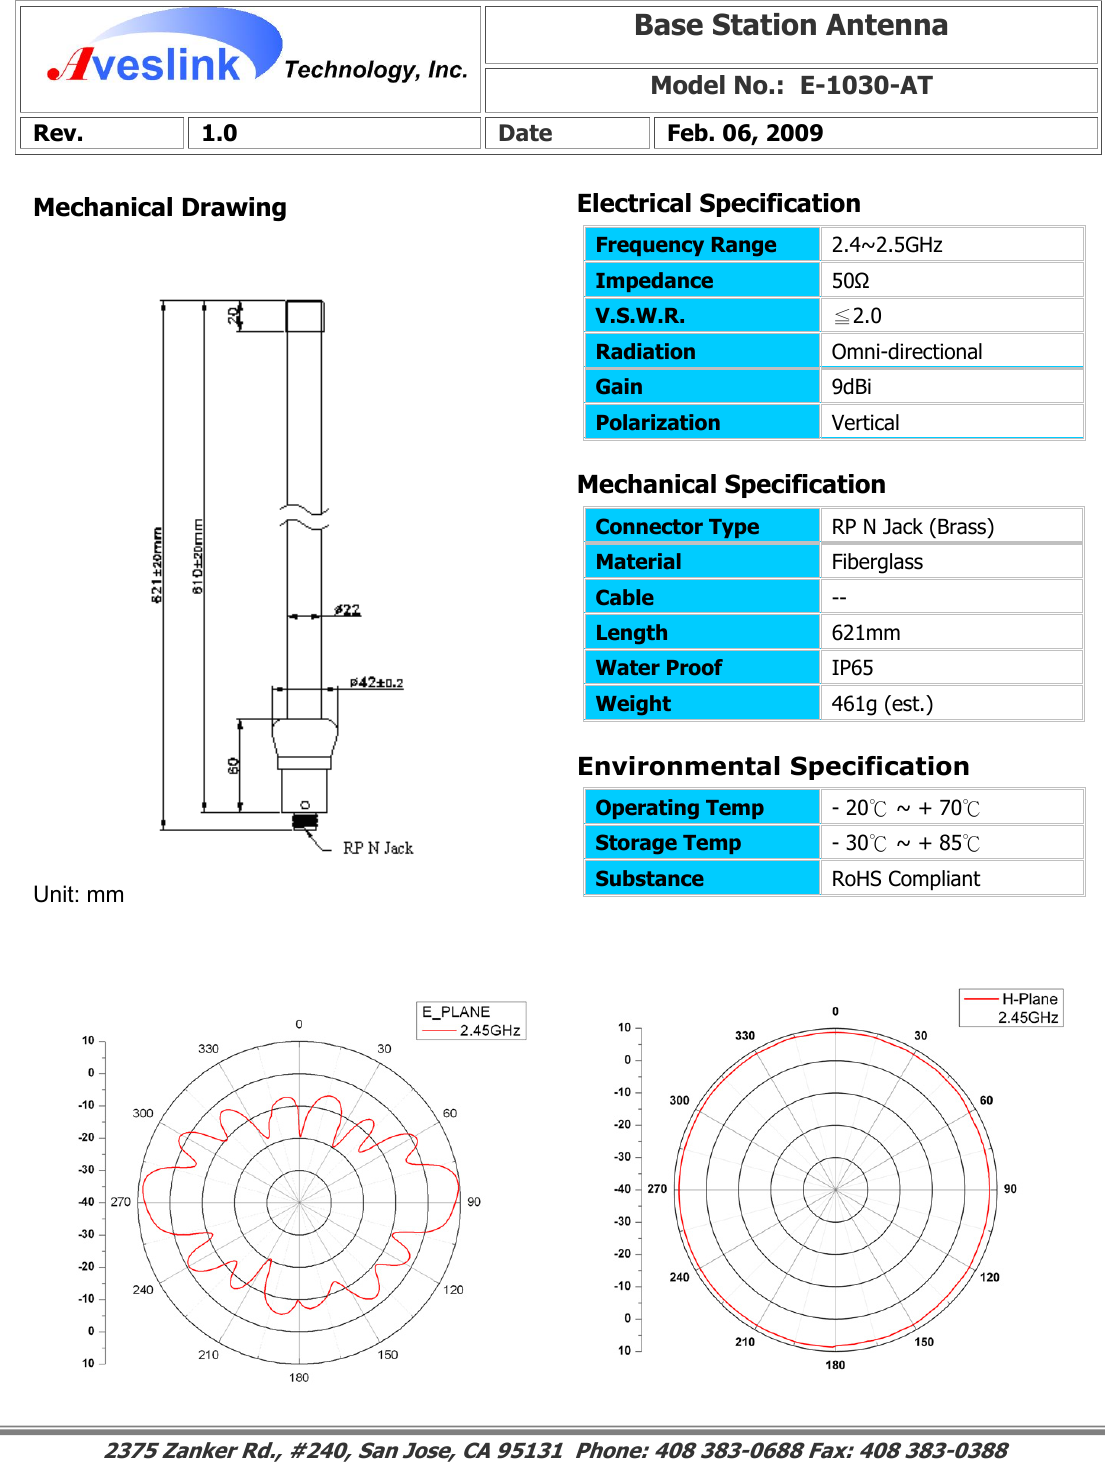 Mechanical DrawingMechanical Specification Environmental SpecificationBase Station Antenna Model No.:  E-1030-ATRev. 1.0  Date  Feb. 06, 2009 Connector Type   RP N Jack (Brass) Material  Fiberglass Cable  -- Length  621mm Water Proof  IP65 Weight  461g (est.)                                                                                                                                                                                                                        2375 Zanker Rd., #240, San Jose, CA 95131  Phone: 408 383-0688 Fax: 408 383-0388 Operating Temp  - 20℃ ~ + 70℃ Storage Temp  - 30℃ ~ + 85℃ Substance  RoHS Compliant Electrical SpecificationFrequency Range   2.4~2.5GHz Impedance  50Ω V.S.W.R.  ≦2.0 Radiation  Omni-directional Gain  9dBi Polarization  Vertical Unit: mm 